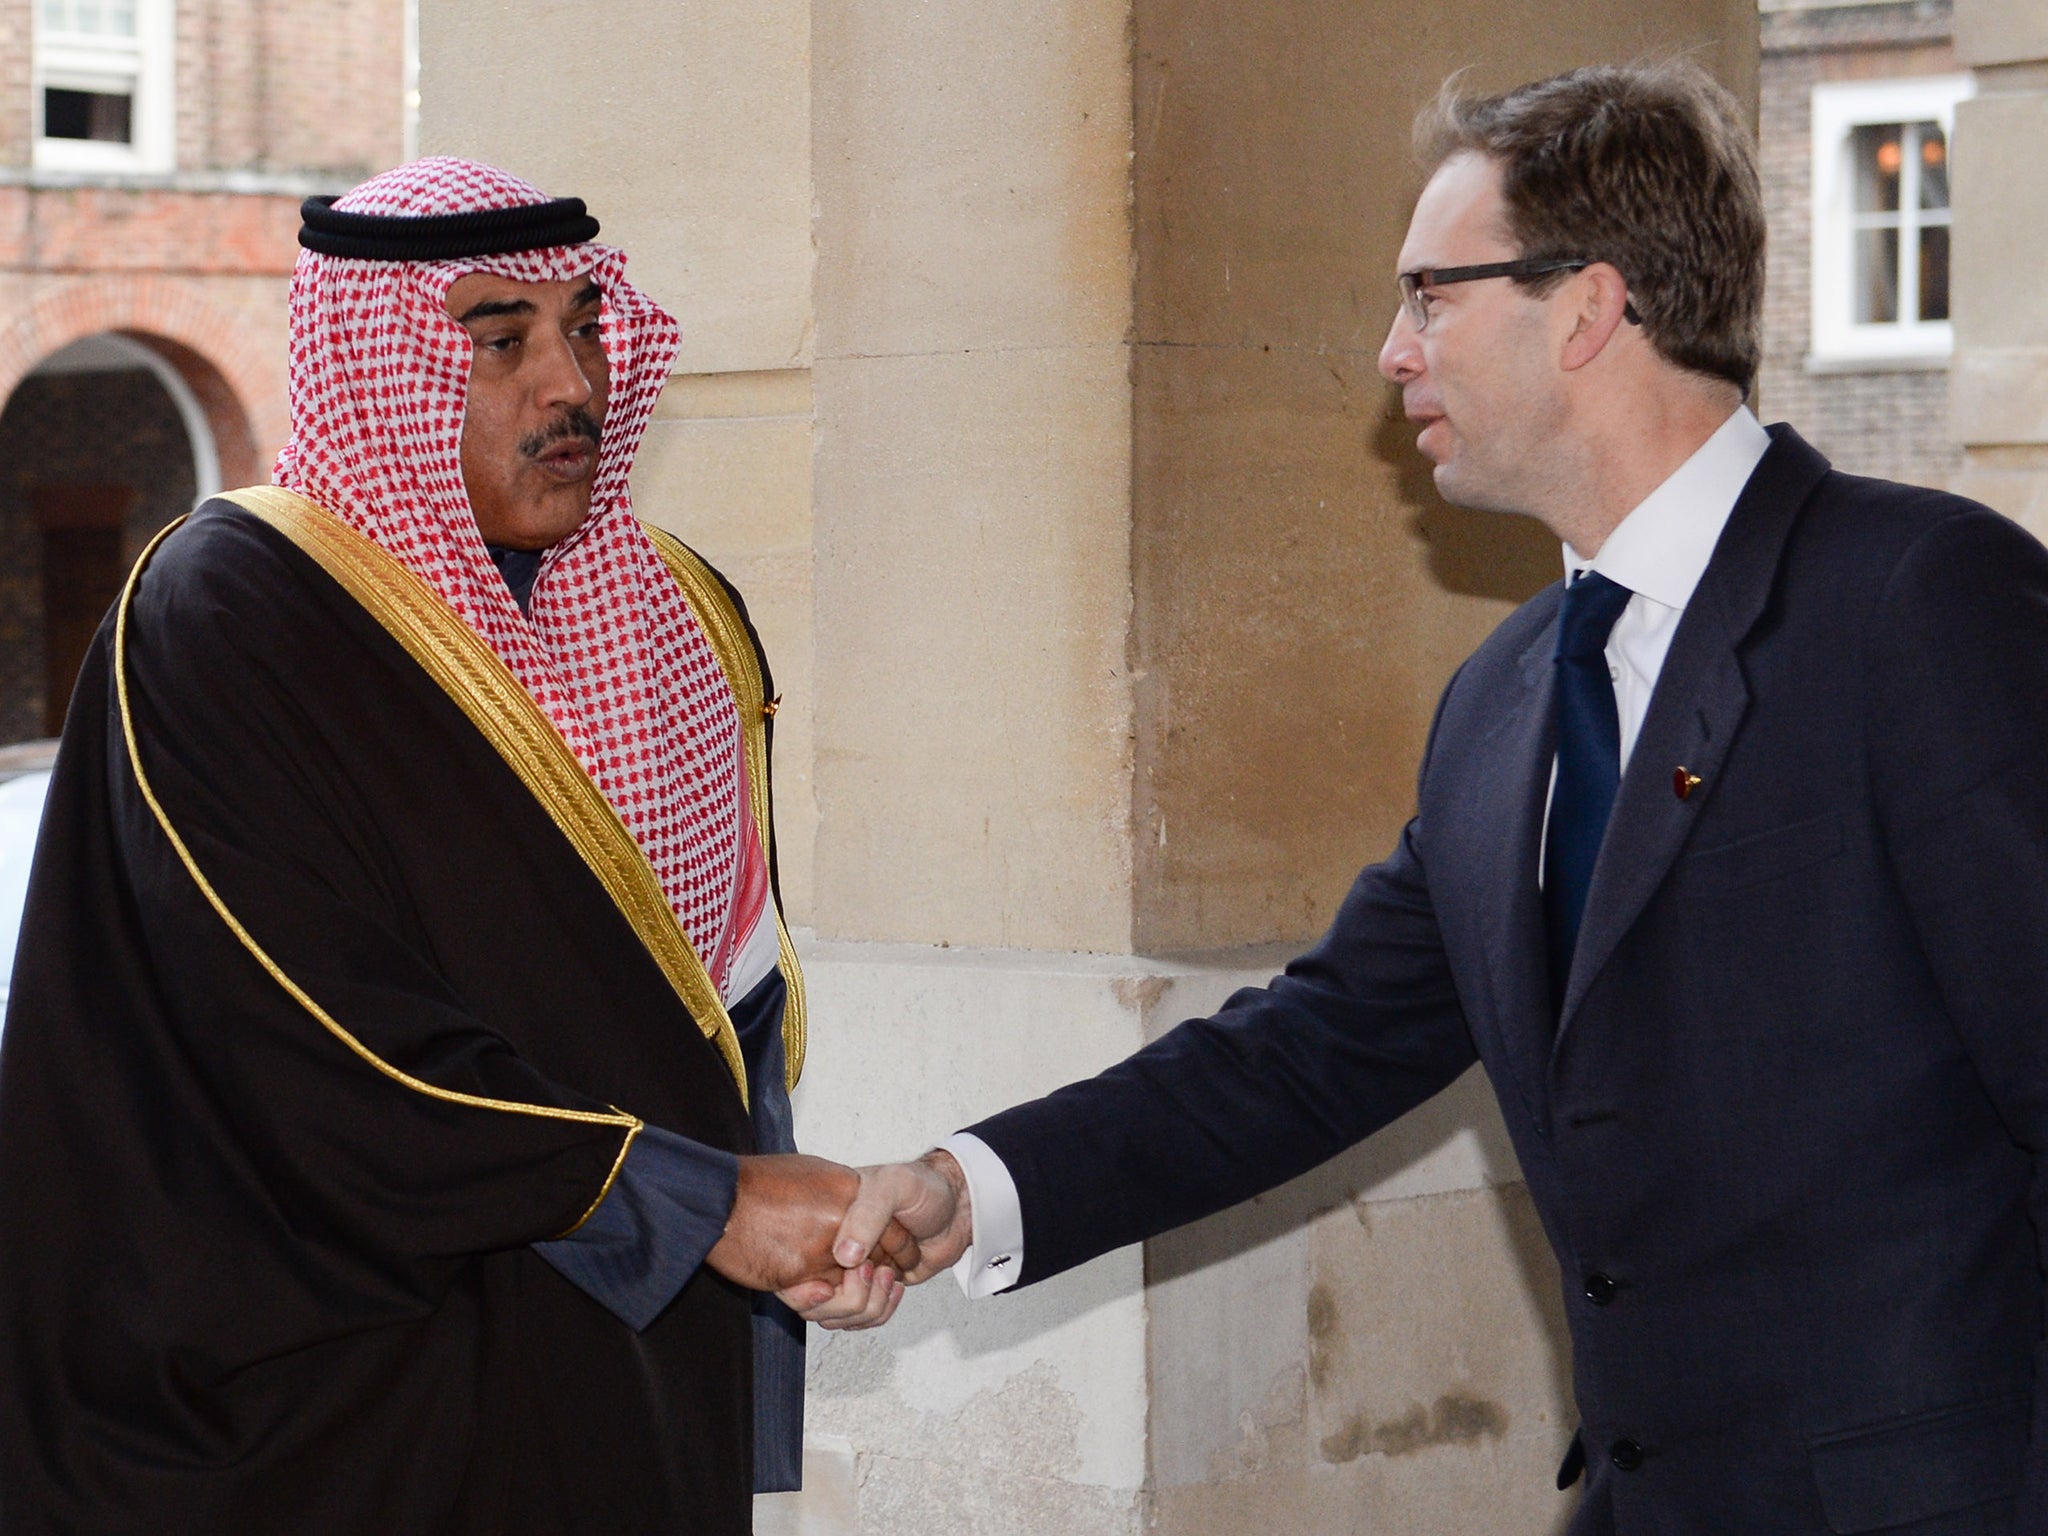 Foreign Office minister Tobias Ellwood, right, greets Kuwaiti Foreign Minister Sheikh Sabah Khaled al-Sabah at a meeting with members of an anti-Islamic State coalition (IS) at Lancaster House last month